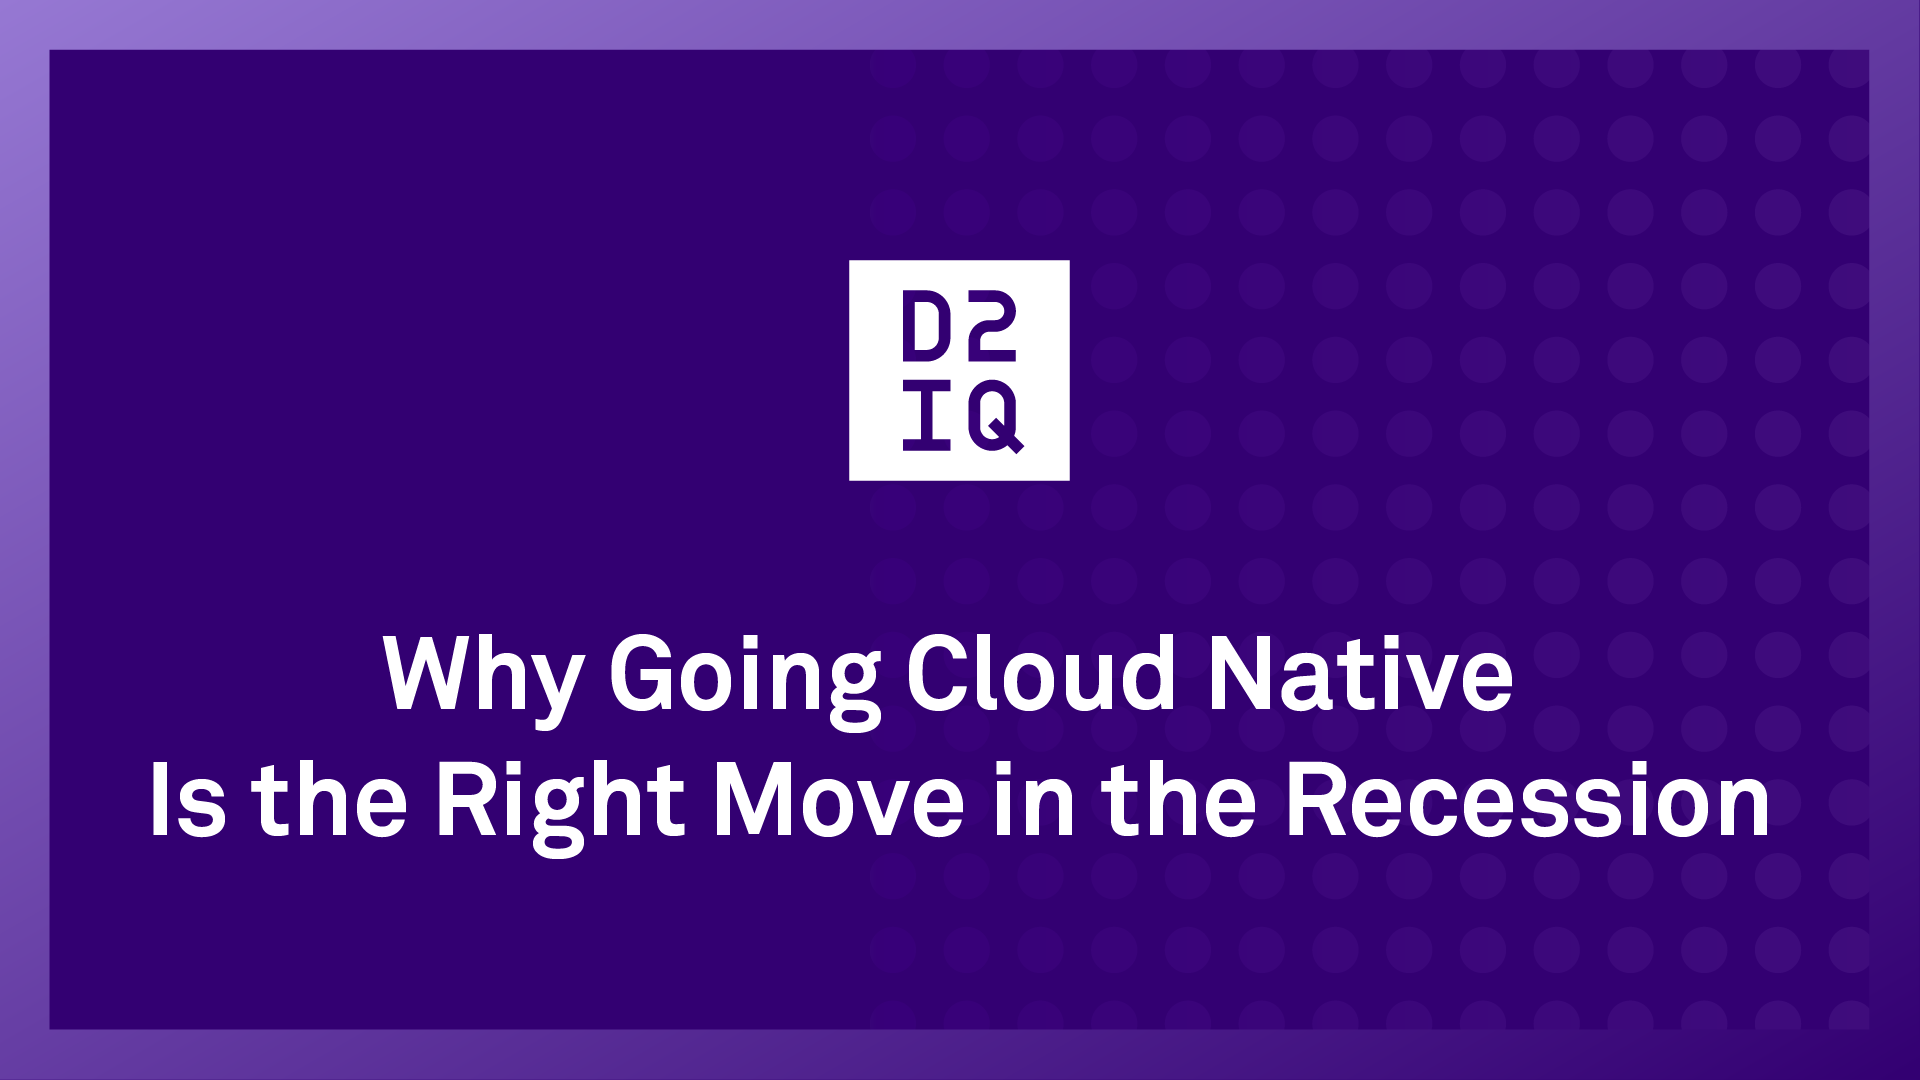 Why Going Cloud Native Is the Right Move in the Recession